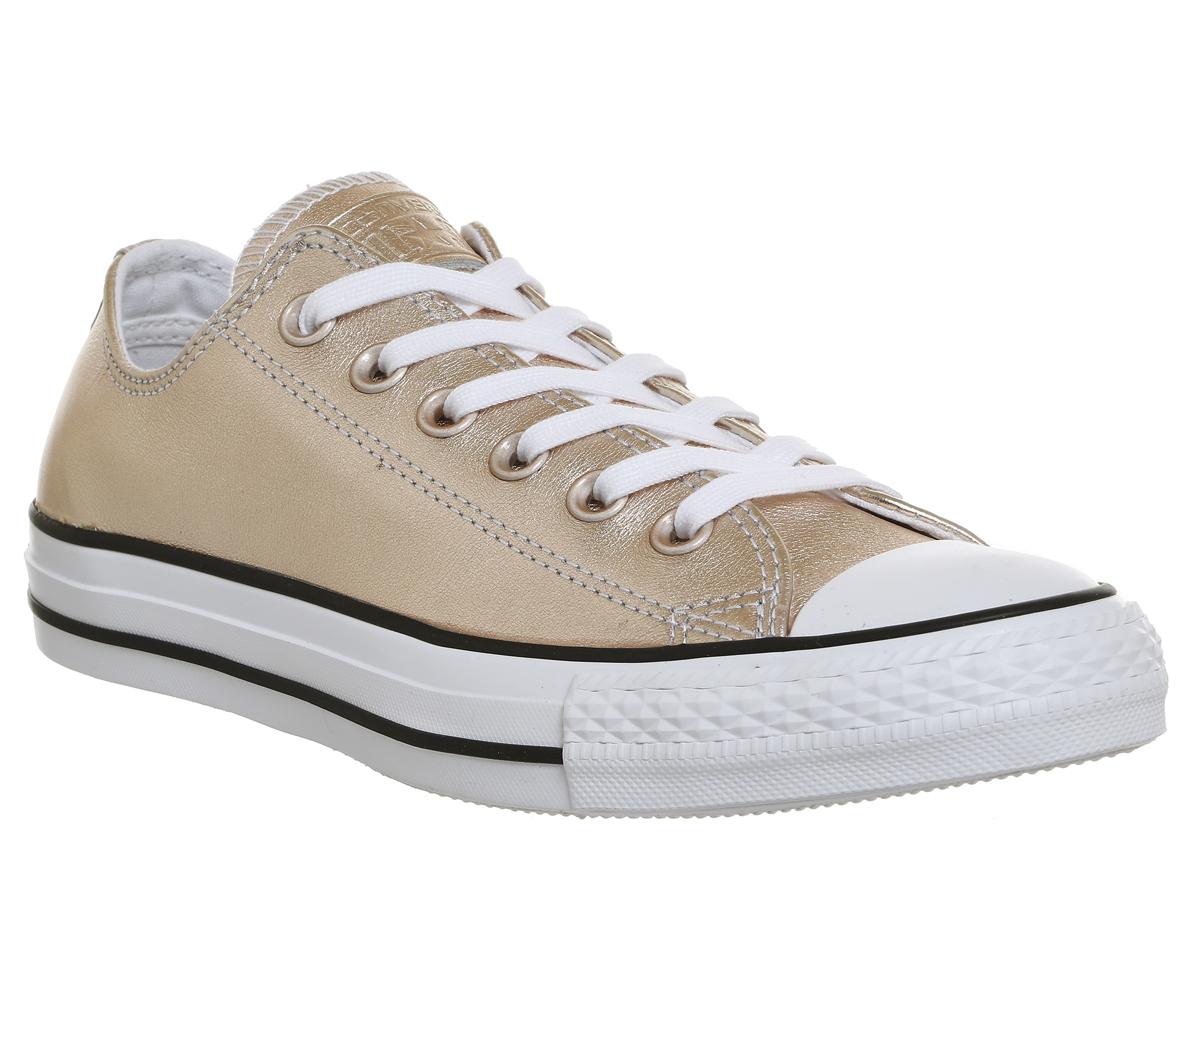 Converse All Star Low Leather Trainers Blush Gold - Hers trainers